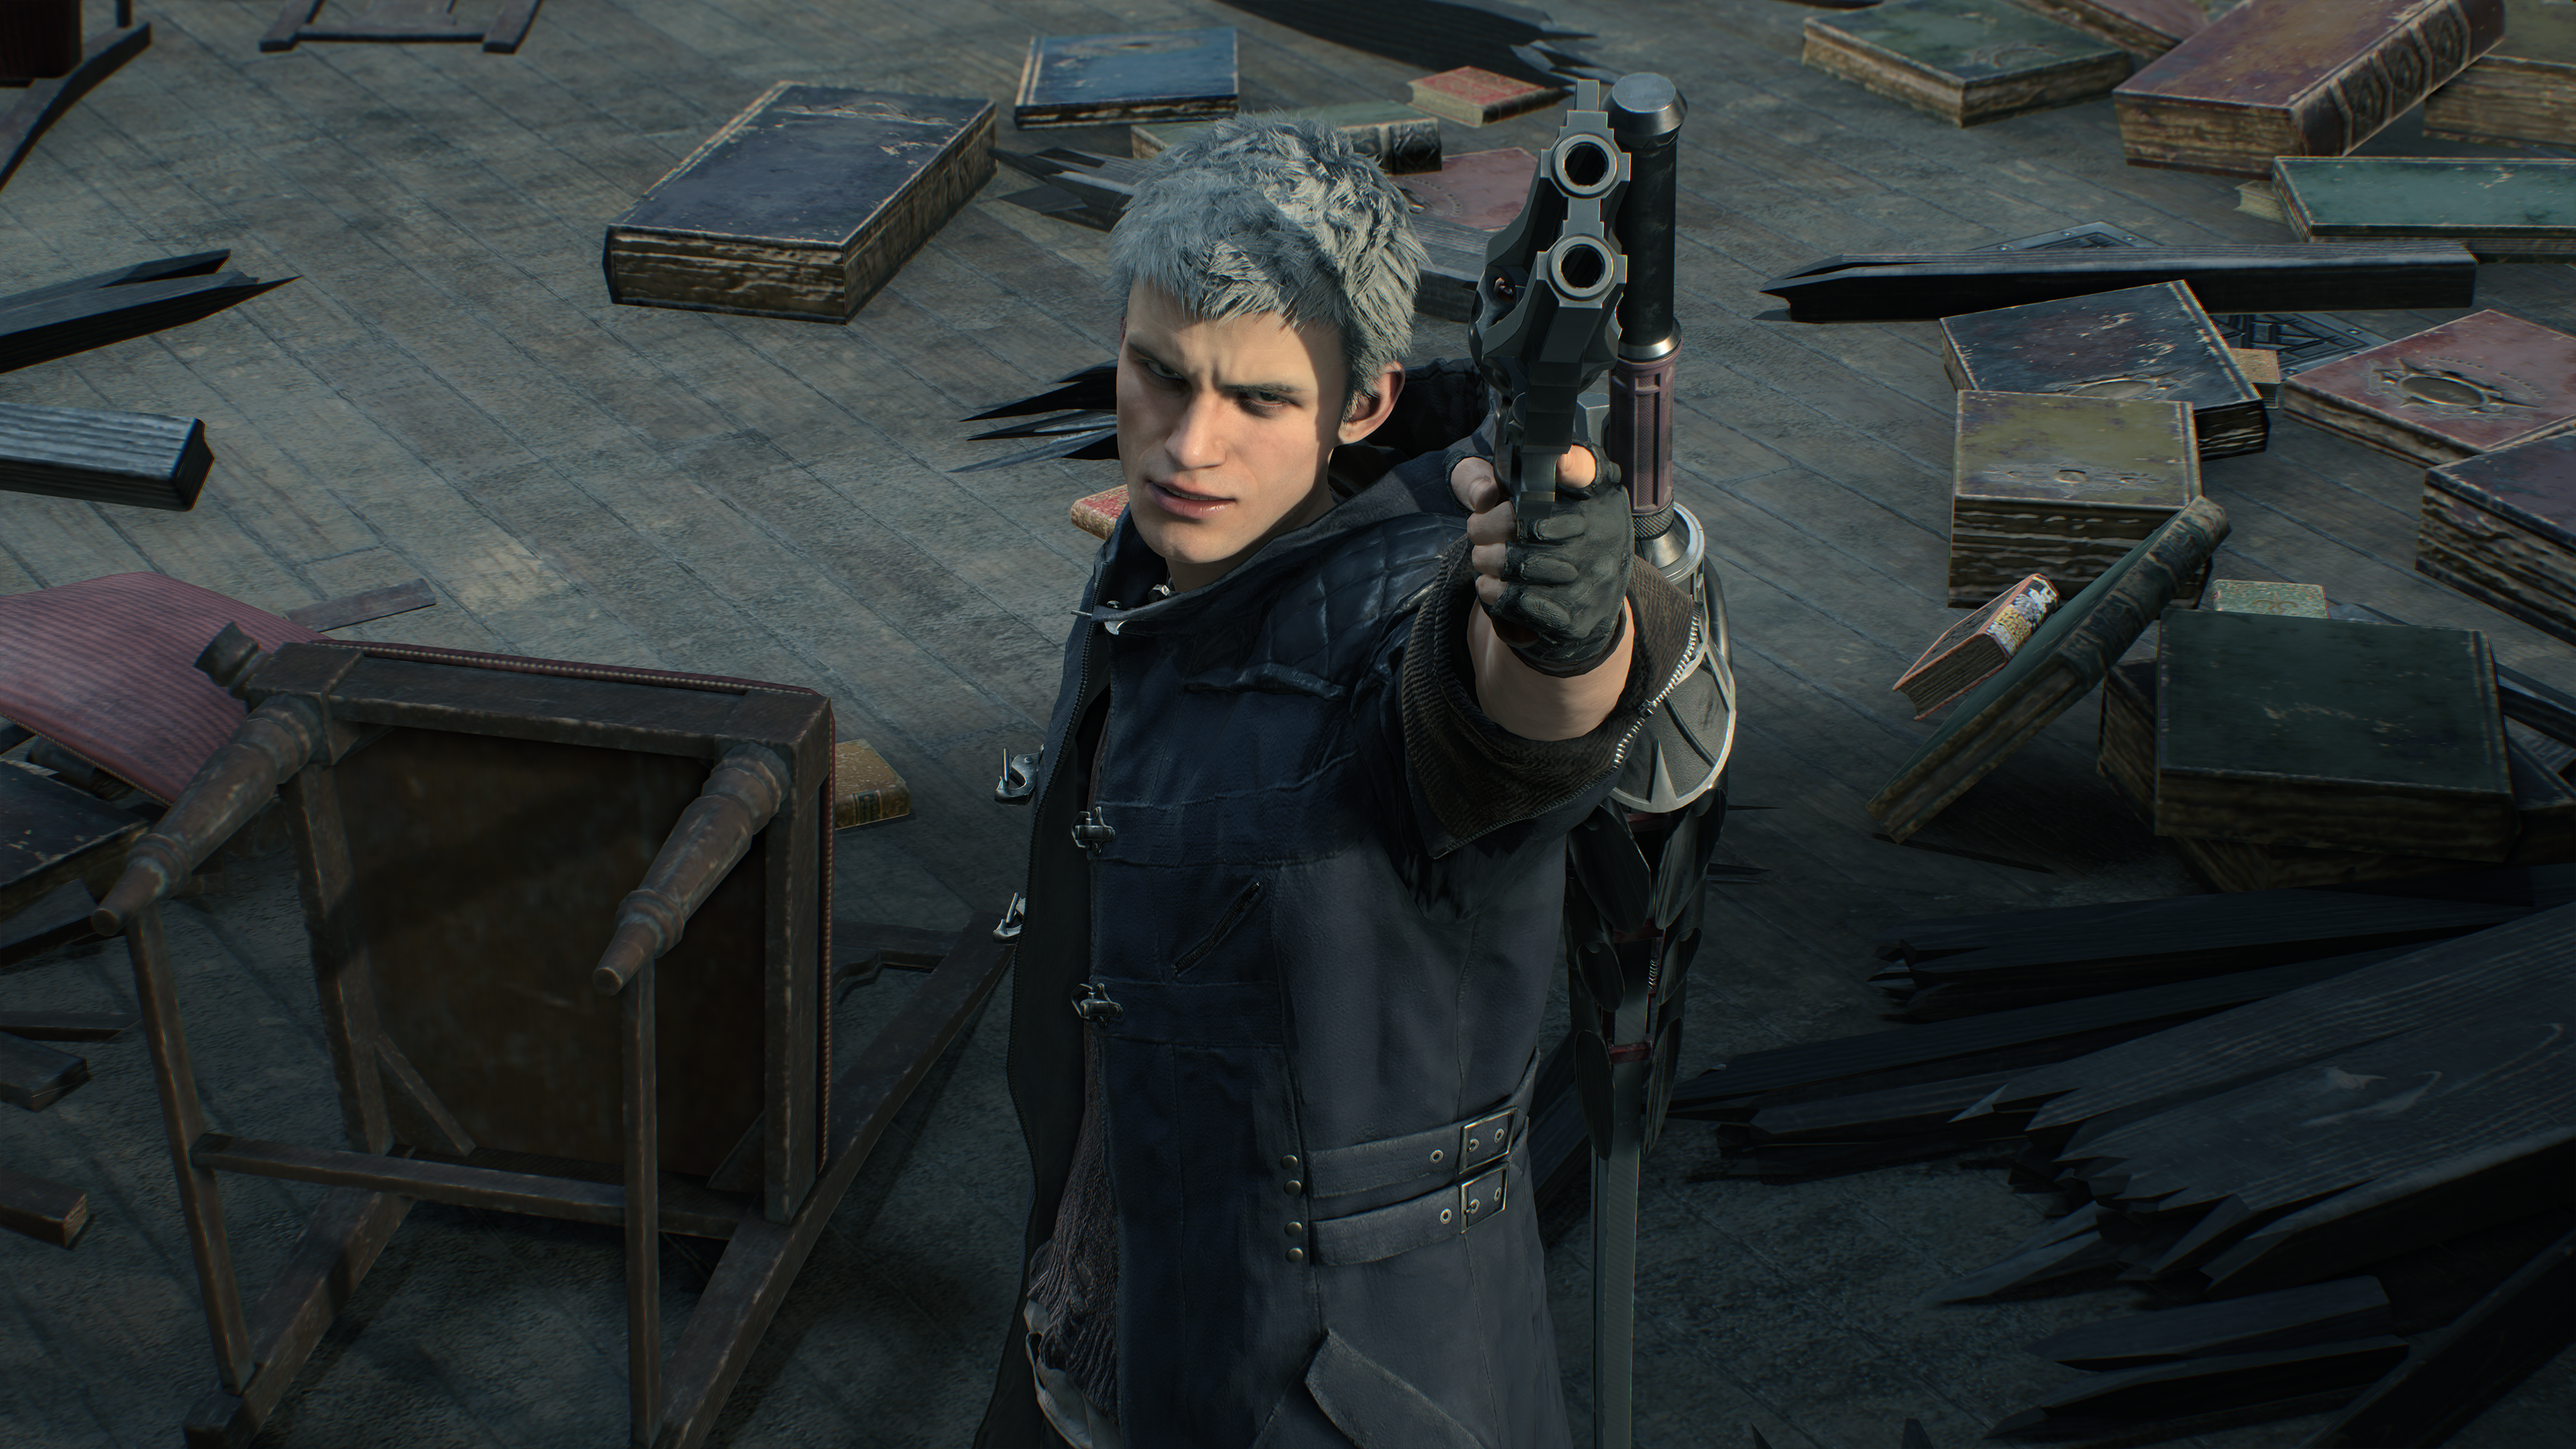 Best Devil May Cry 5 Mods You Can't Play Without